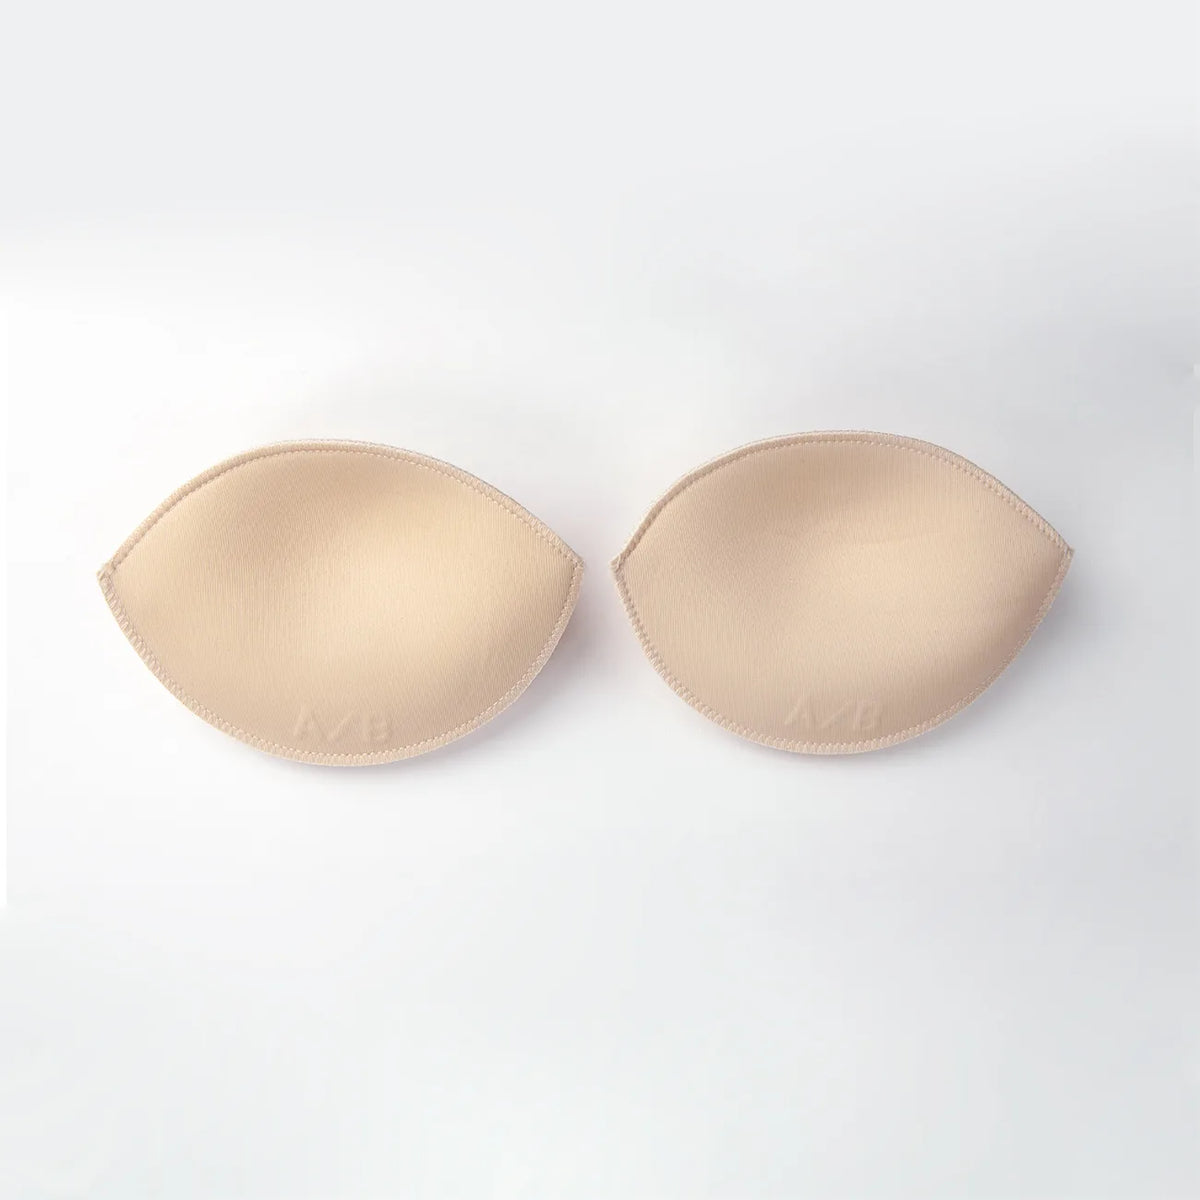 Water filled push up pads at Belle Lacet Lingerie.